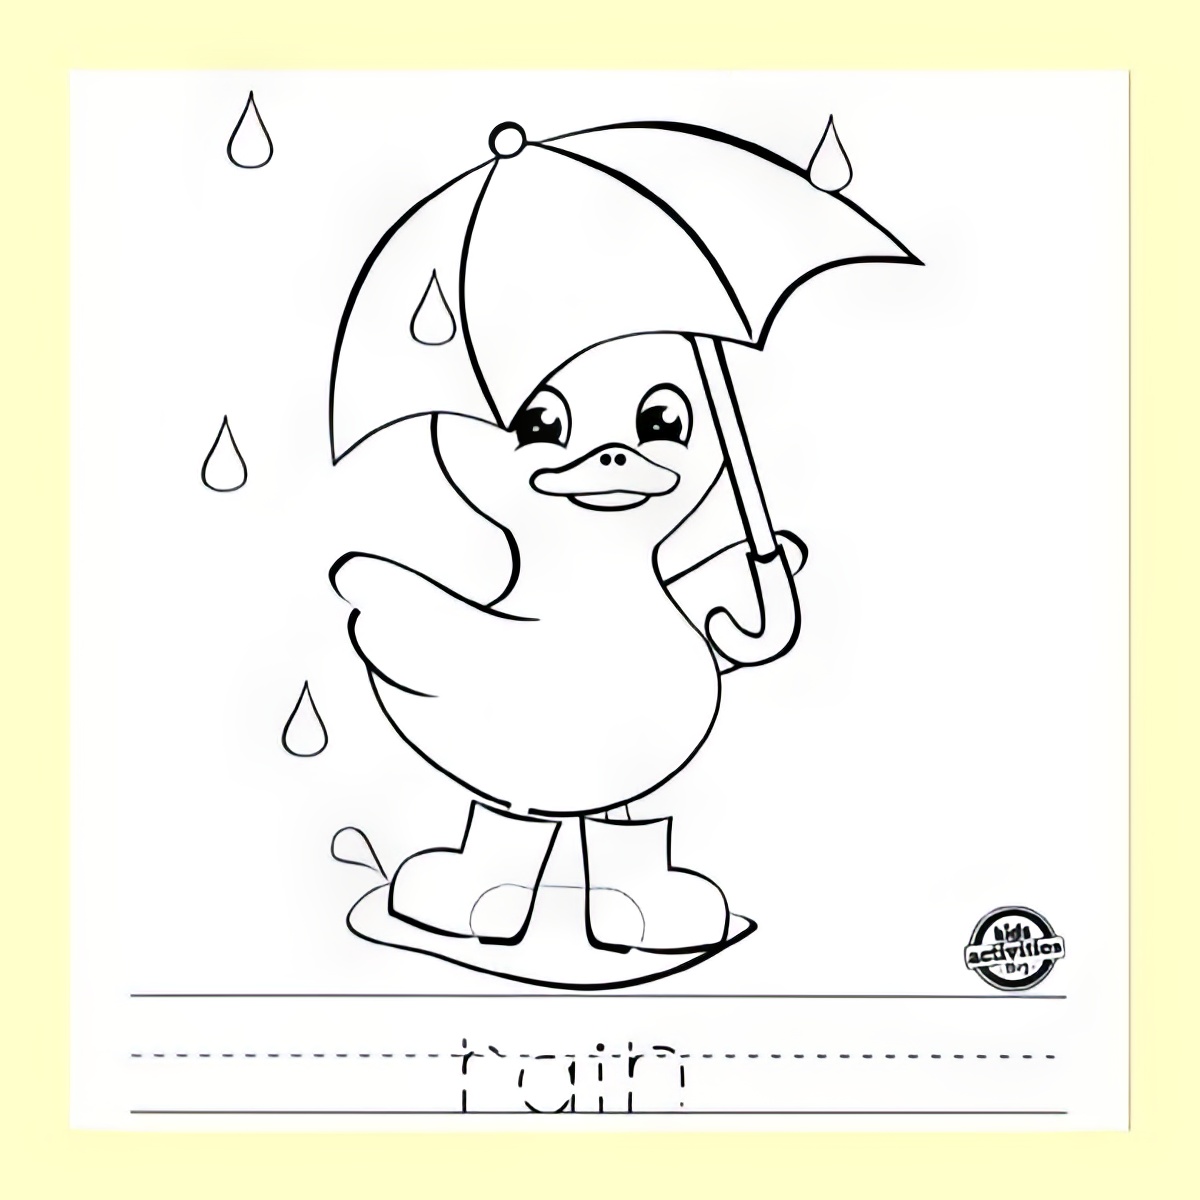 coloring pages, weather coloring pages, printables, weather lessons for young kids